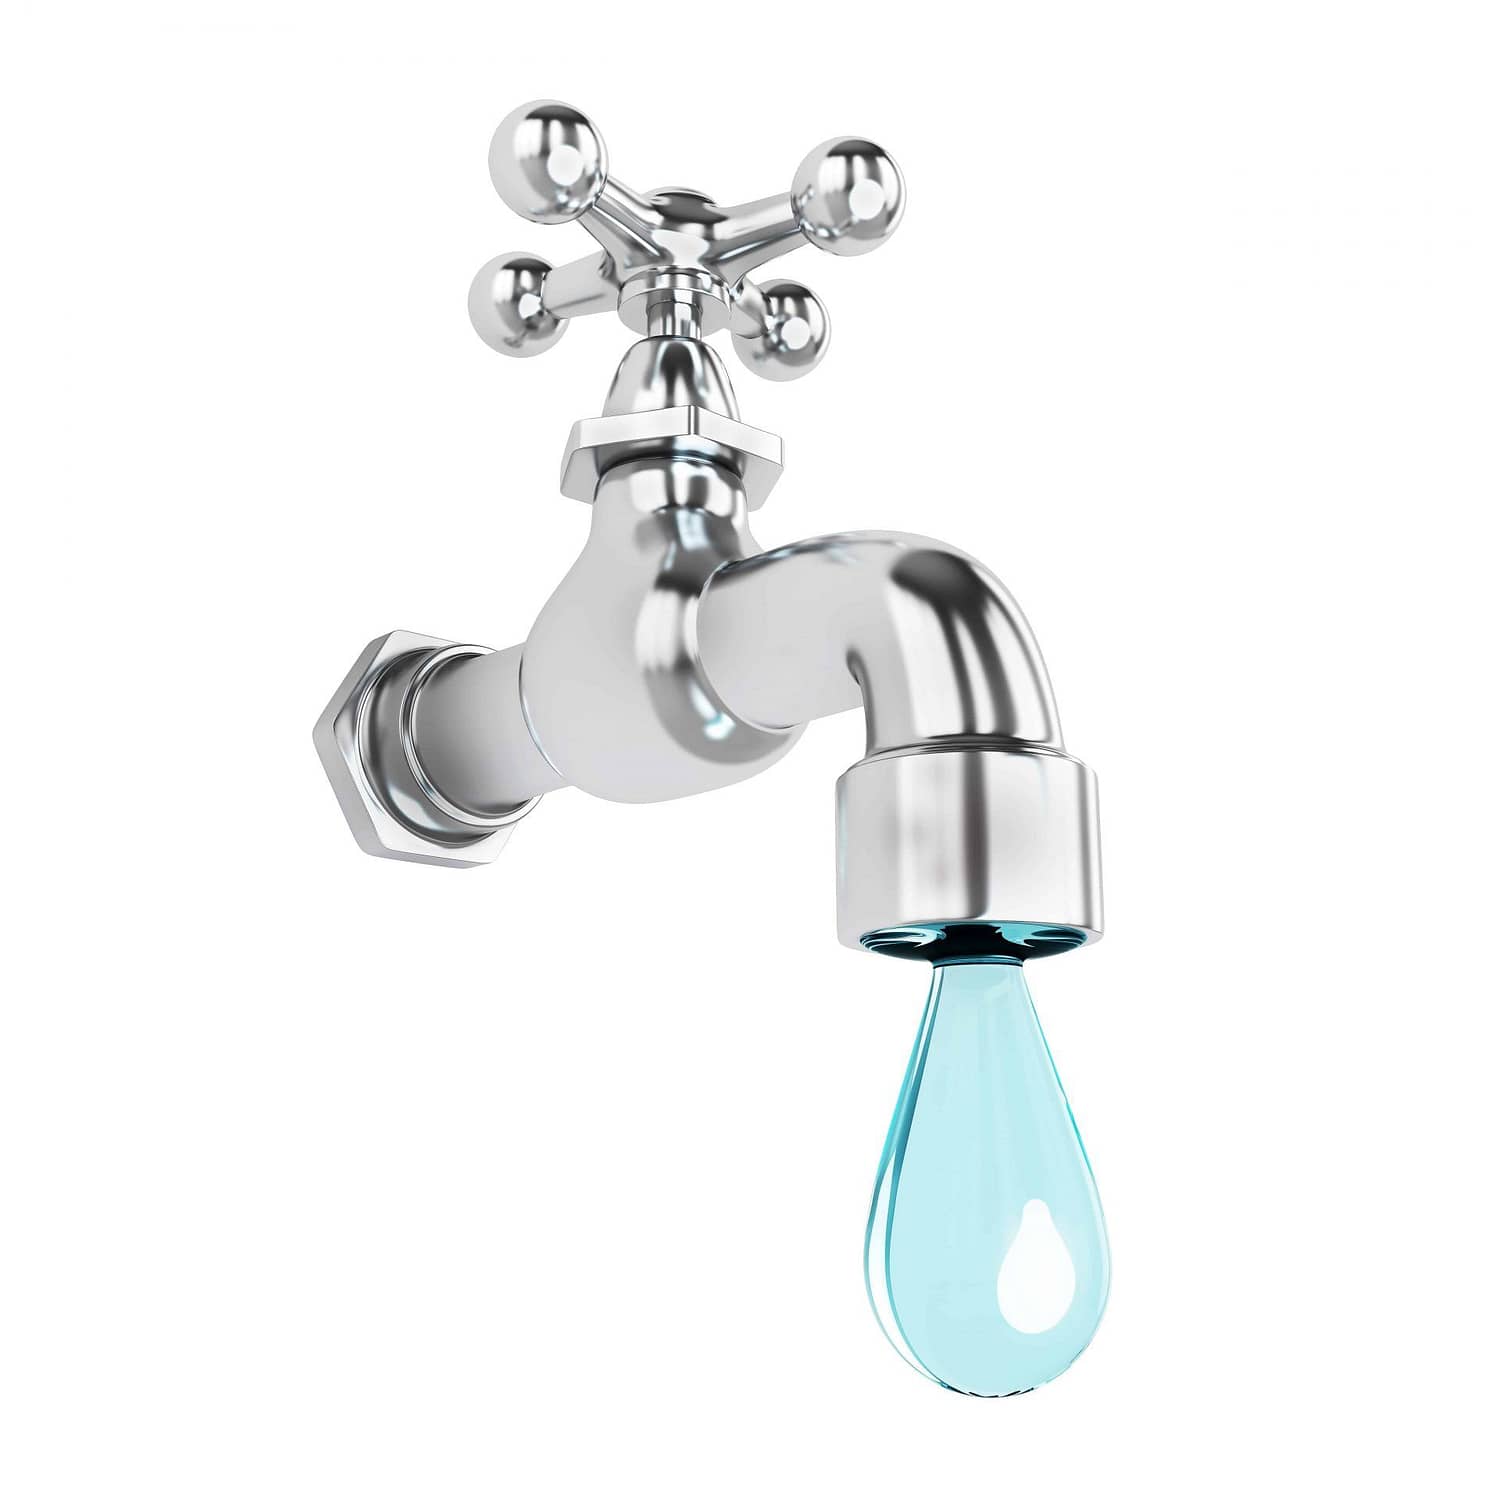 Illustration of a water dripping from a faucet